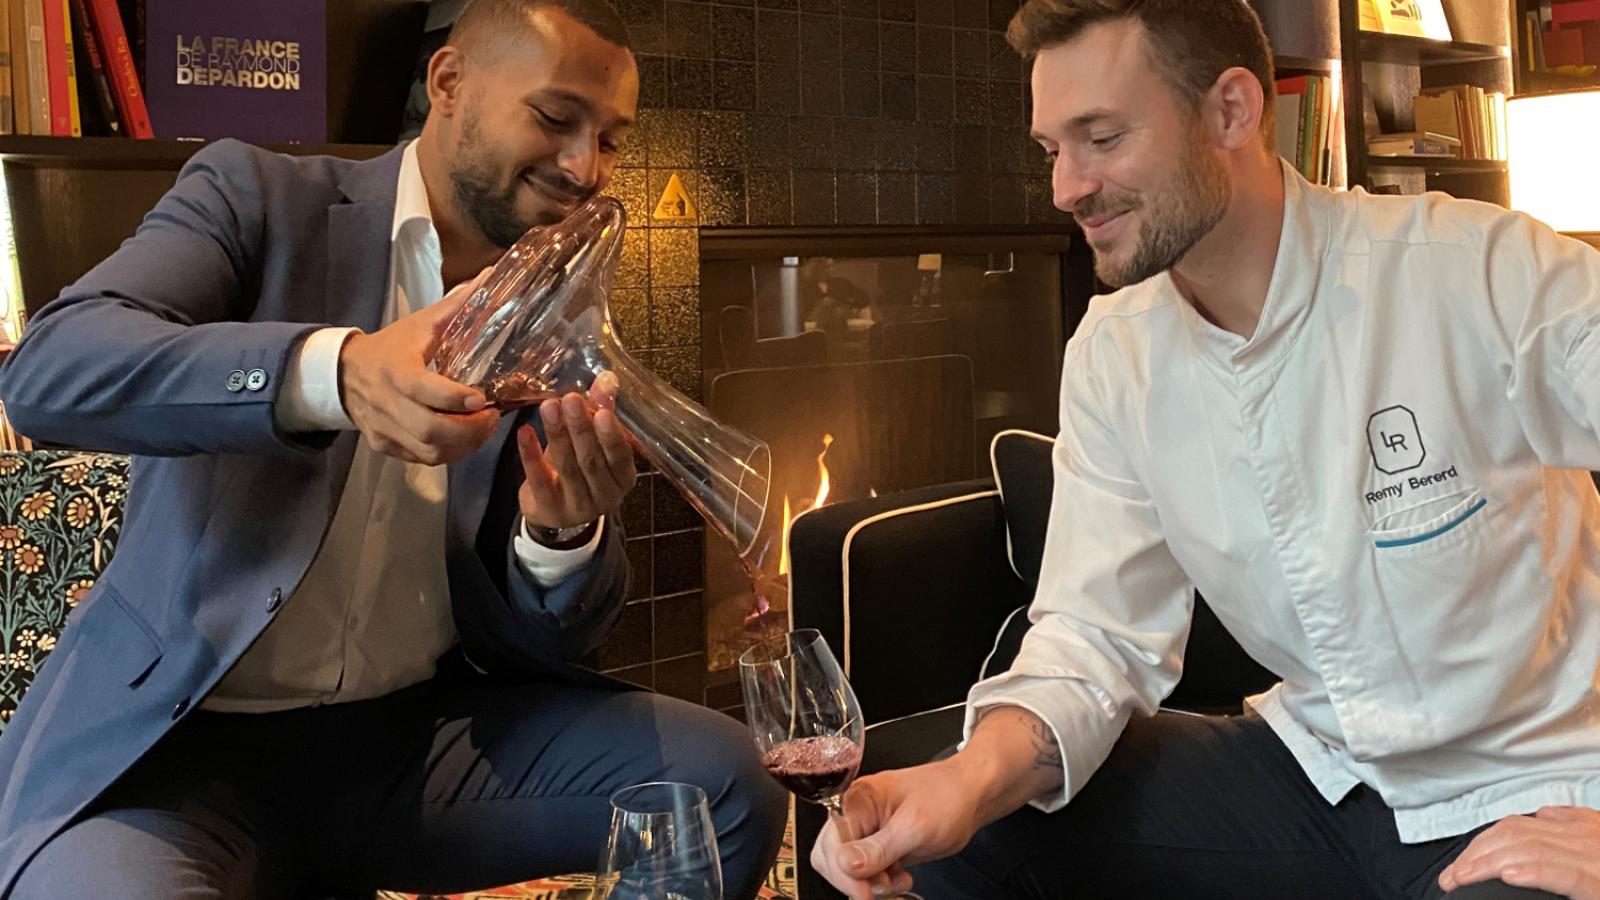 “Roch the Wine”: meetings around wine at your hotel